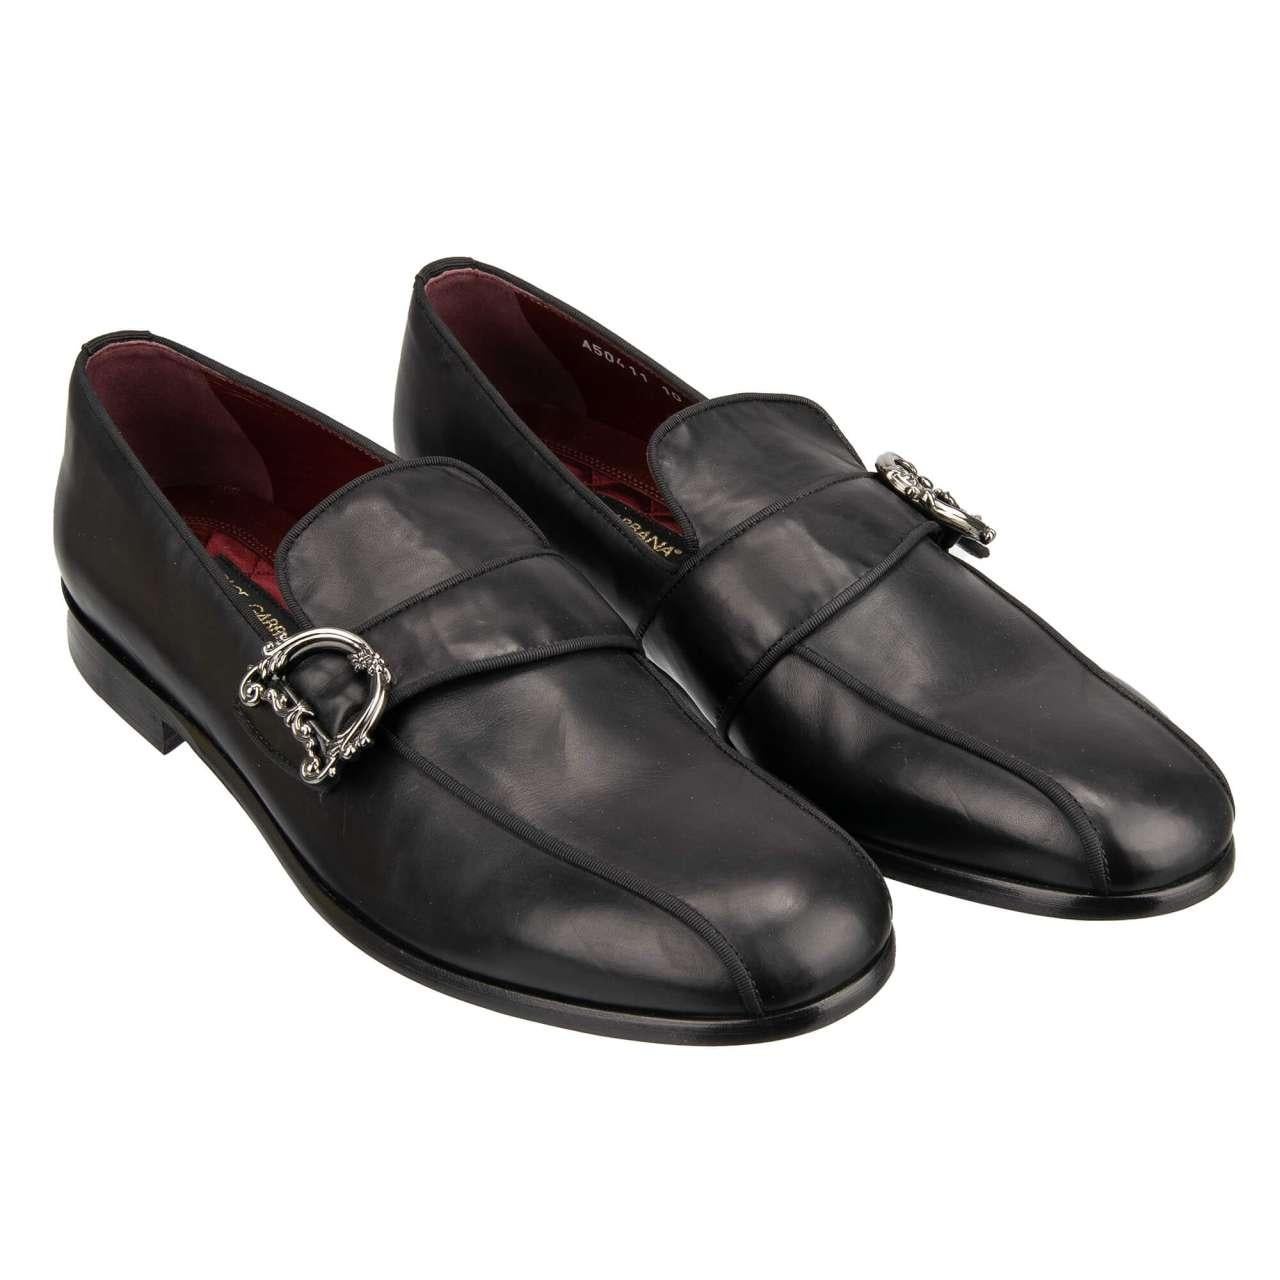 - DG Baroque logo buckle embellished loafer shoes MILANO made of leather in black by DOLCE & GABBANA - MADE IN ITALY - Former RRP: EUR 750 - New with Box - Model: A50411-AW5938-80999 - Material: 100% Calfskin - Sole: Leather - Color: Black - Satin